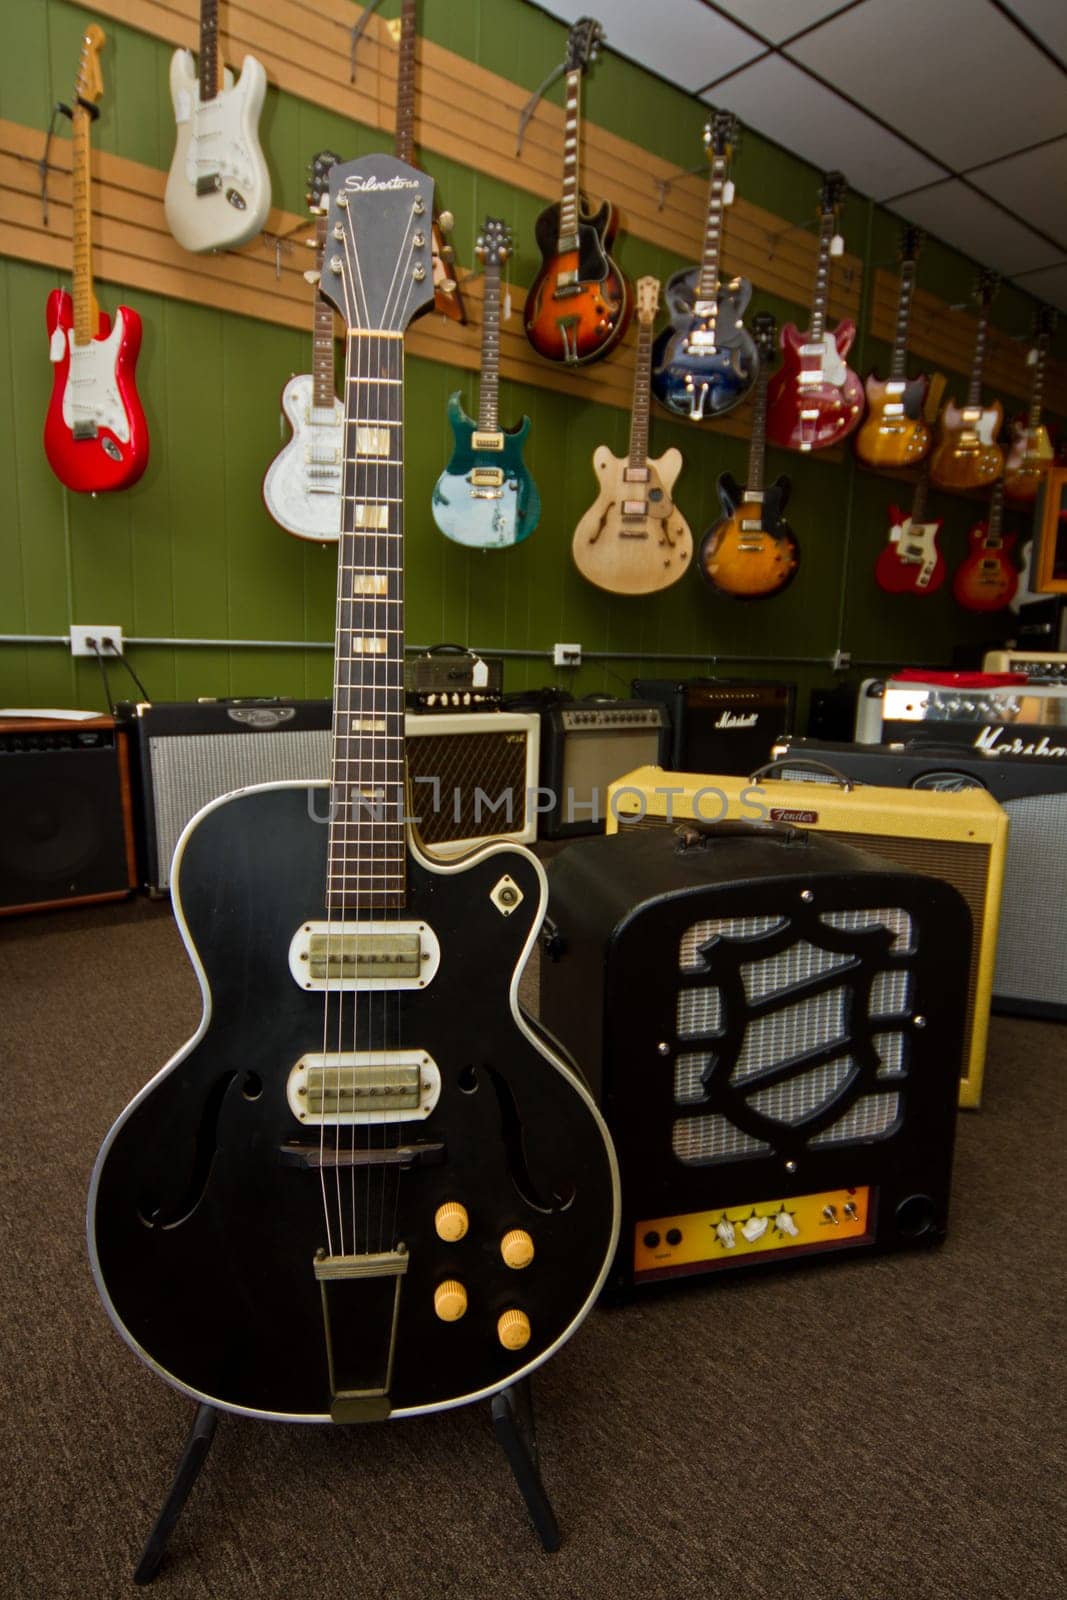 Classic Black Electric Guitar in Foreground of Diverse Music Store Collection by njproductions